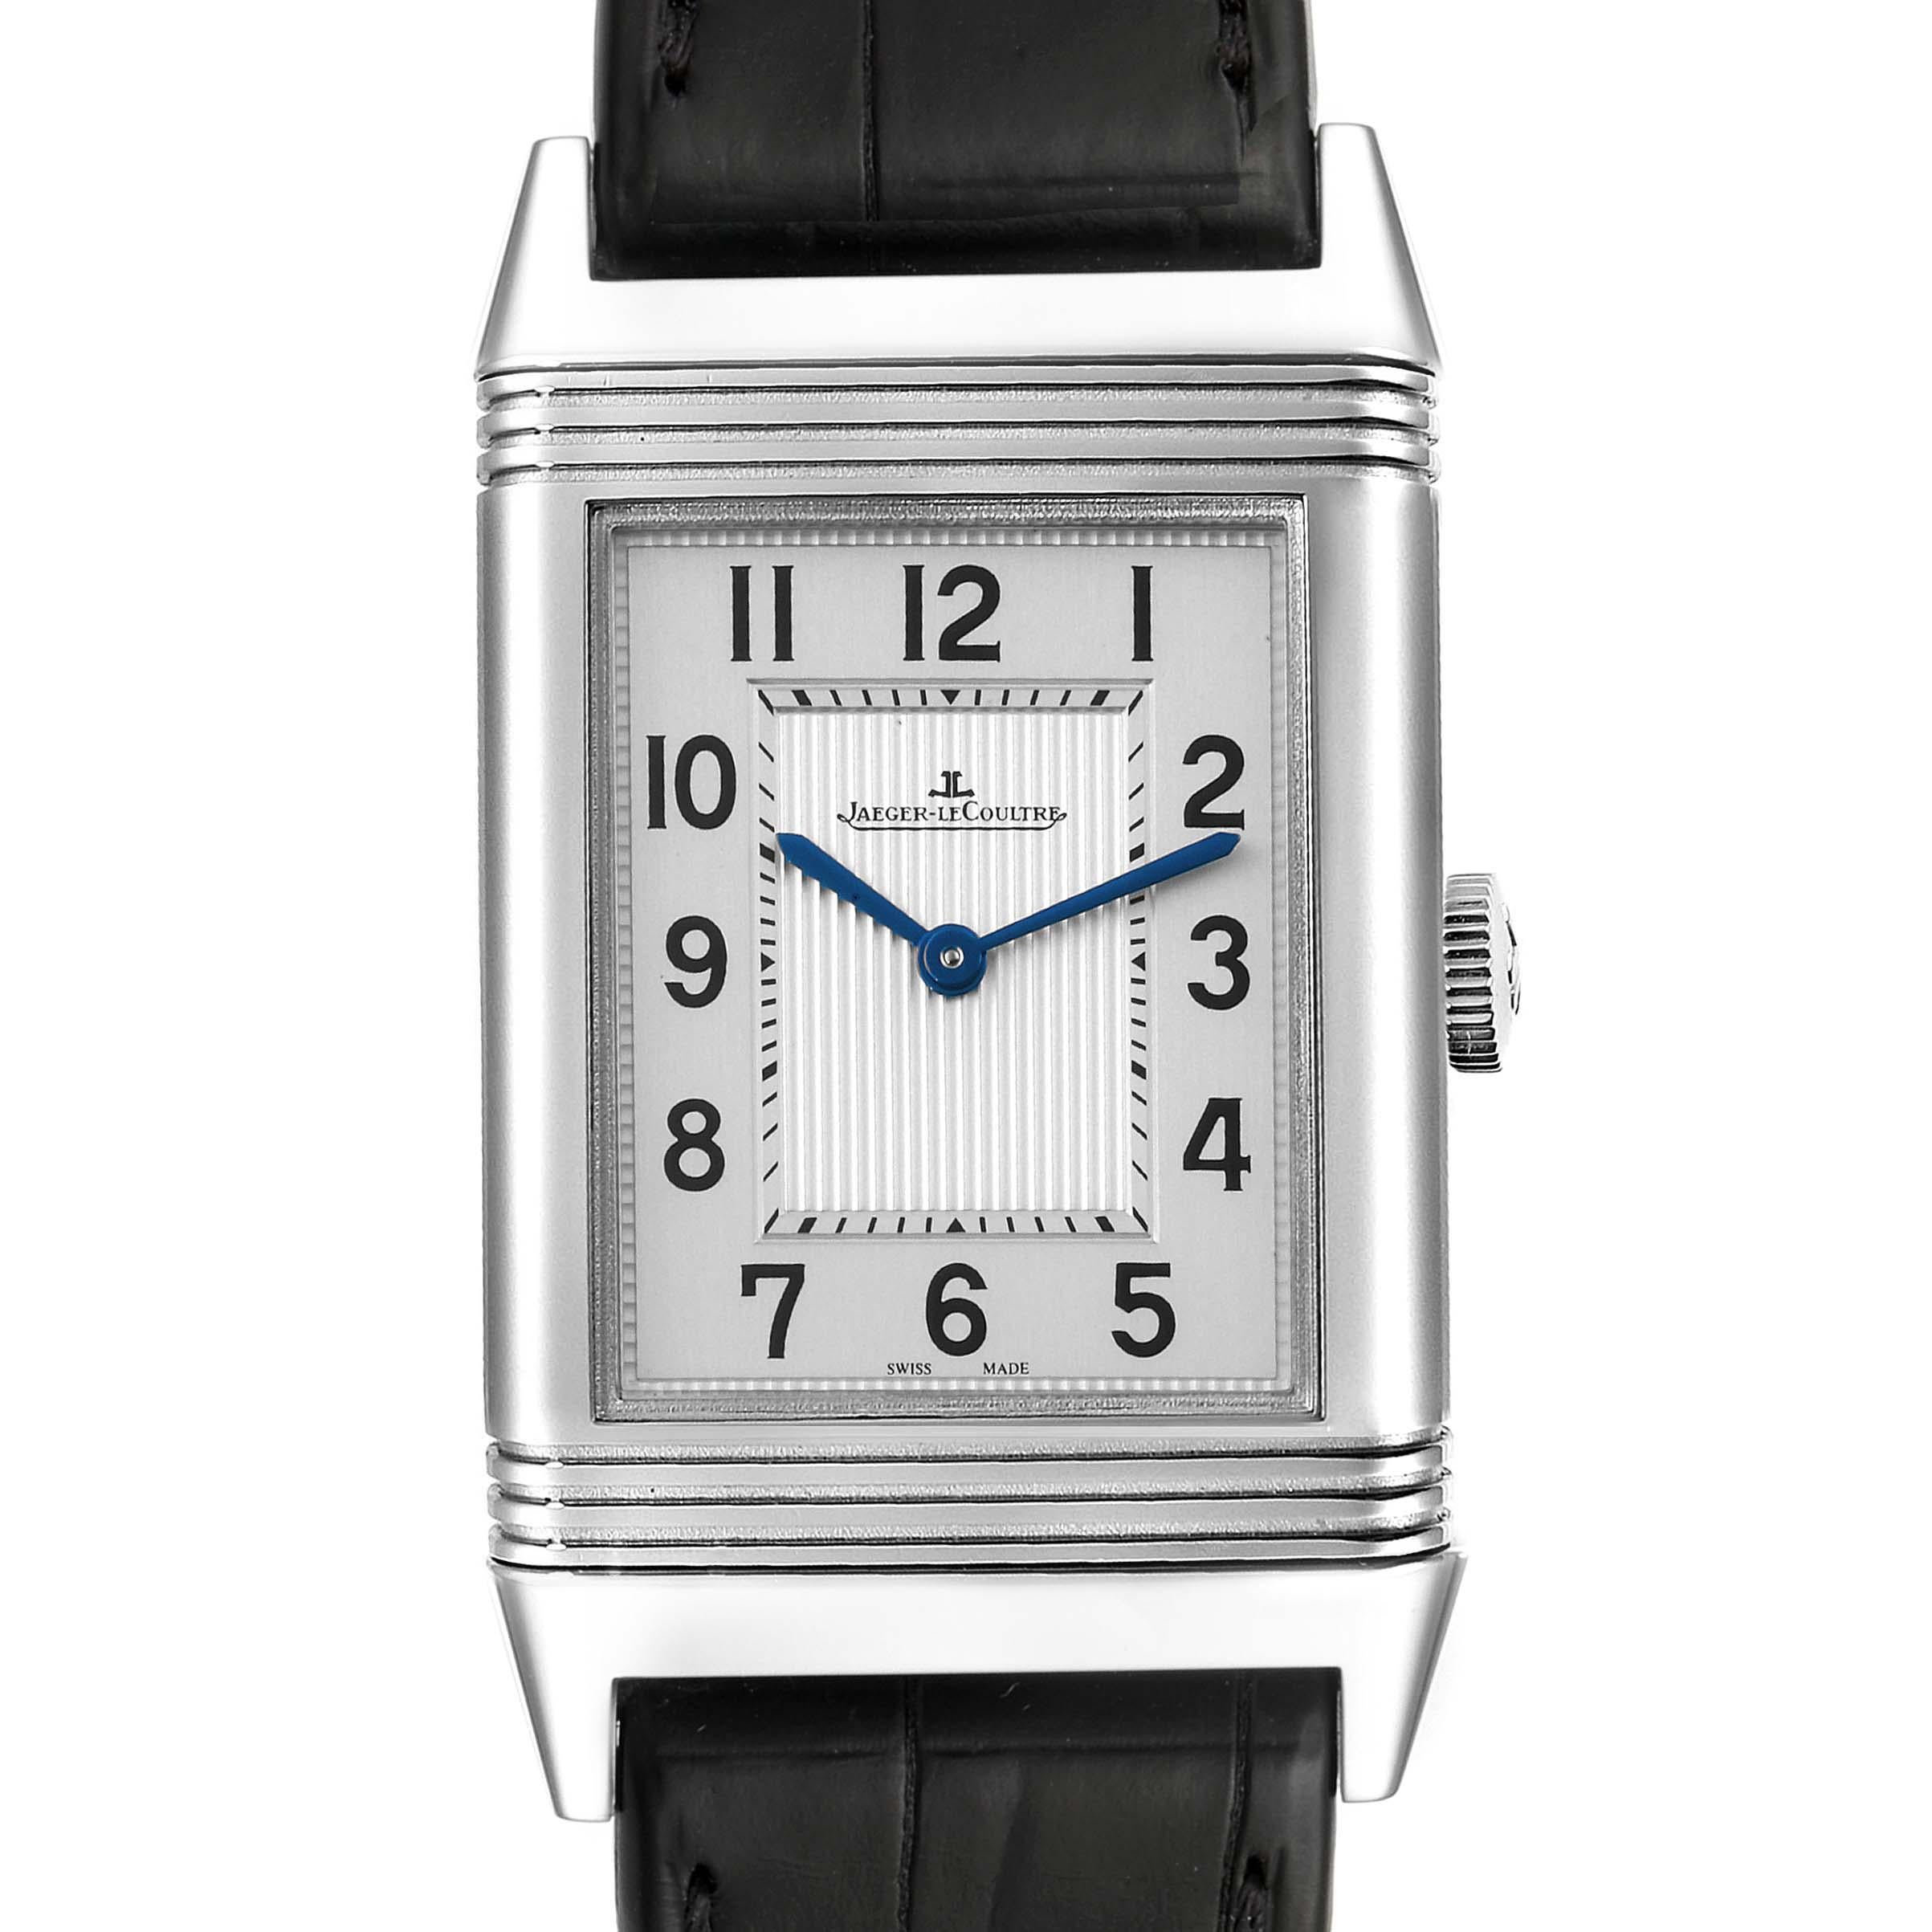 Jaeger LeCoultre Grande Reverso Ultra Thin Mens Watch 277.8.62 Q2788520. Manual winding movement. Stainless steel five-body 45.6 mm x 27.4 mm rectangular rotating case. Case thickness: 8.5 mm. Solid case back. Stainless steel reeded bezel. Scratch